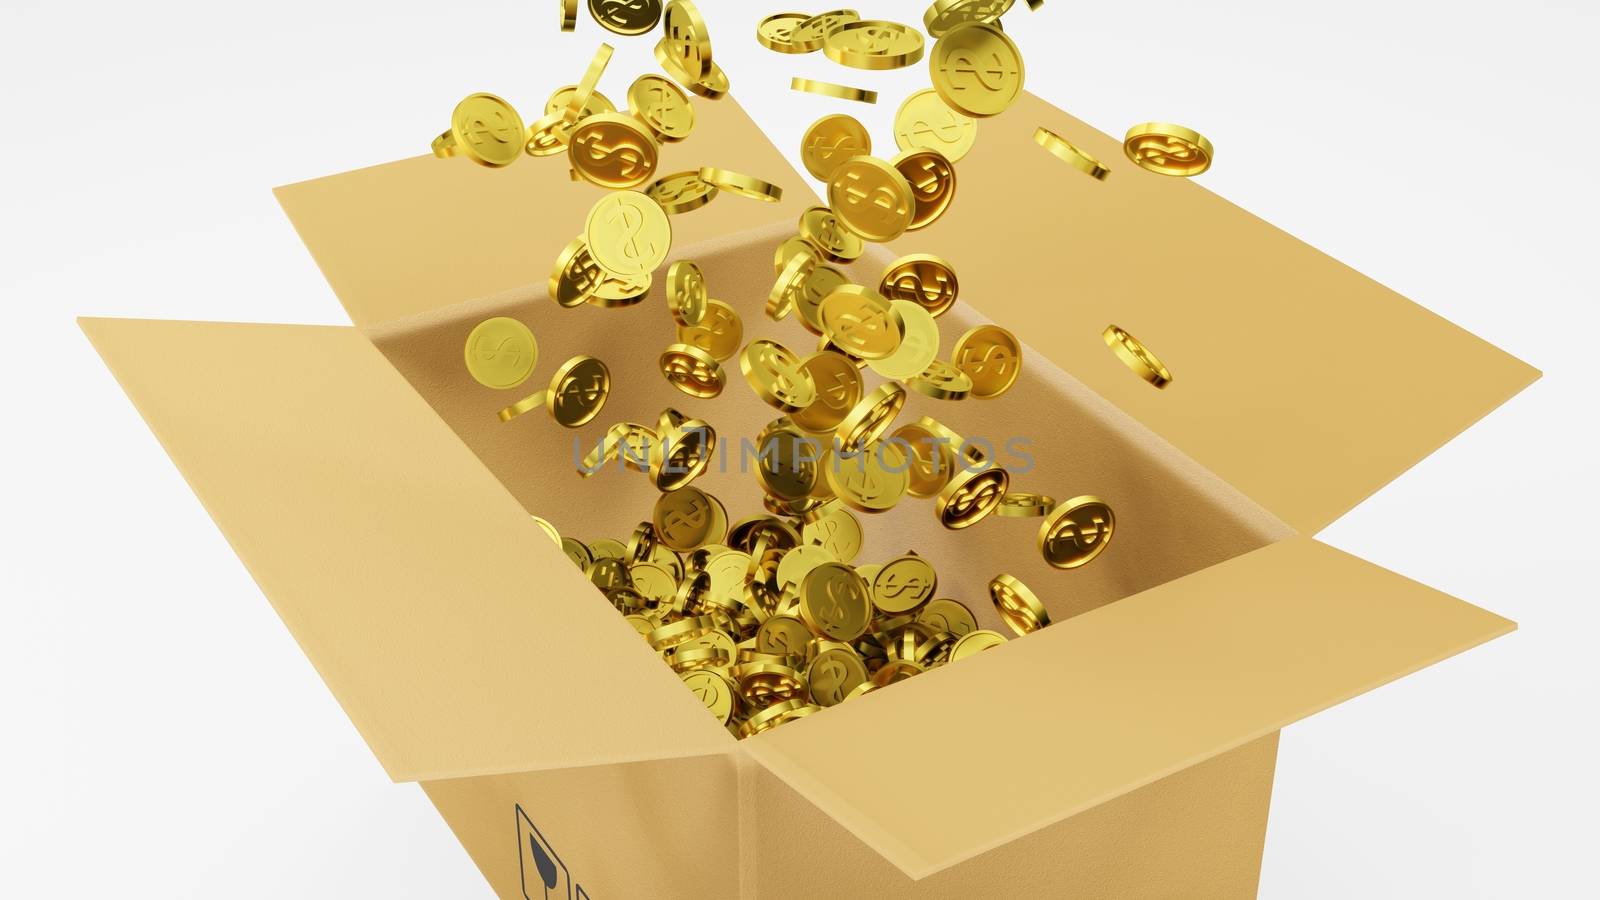 3D Rendered a number of Golden Dollars Coins Falling into Brown Package on White Background Still Image by ariya23156